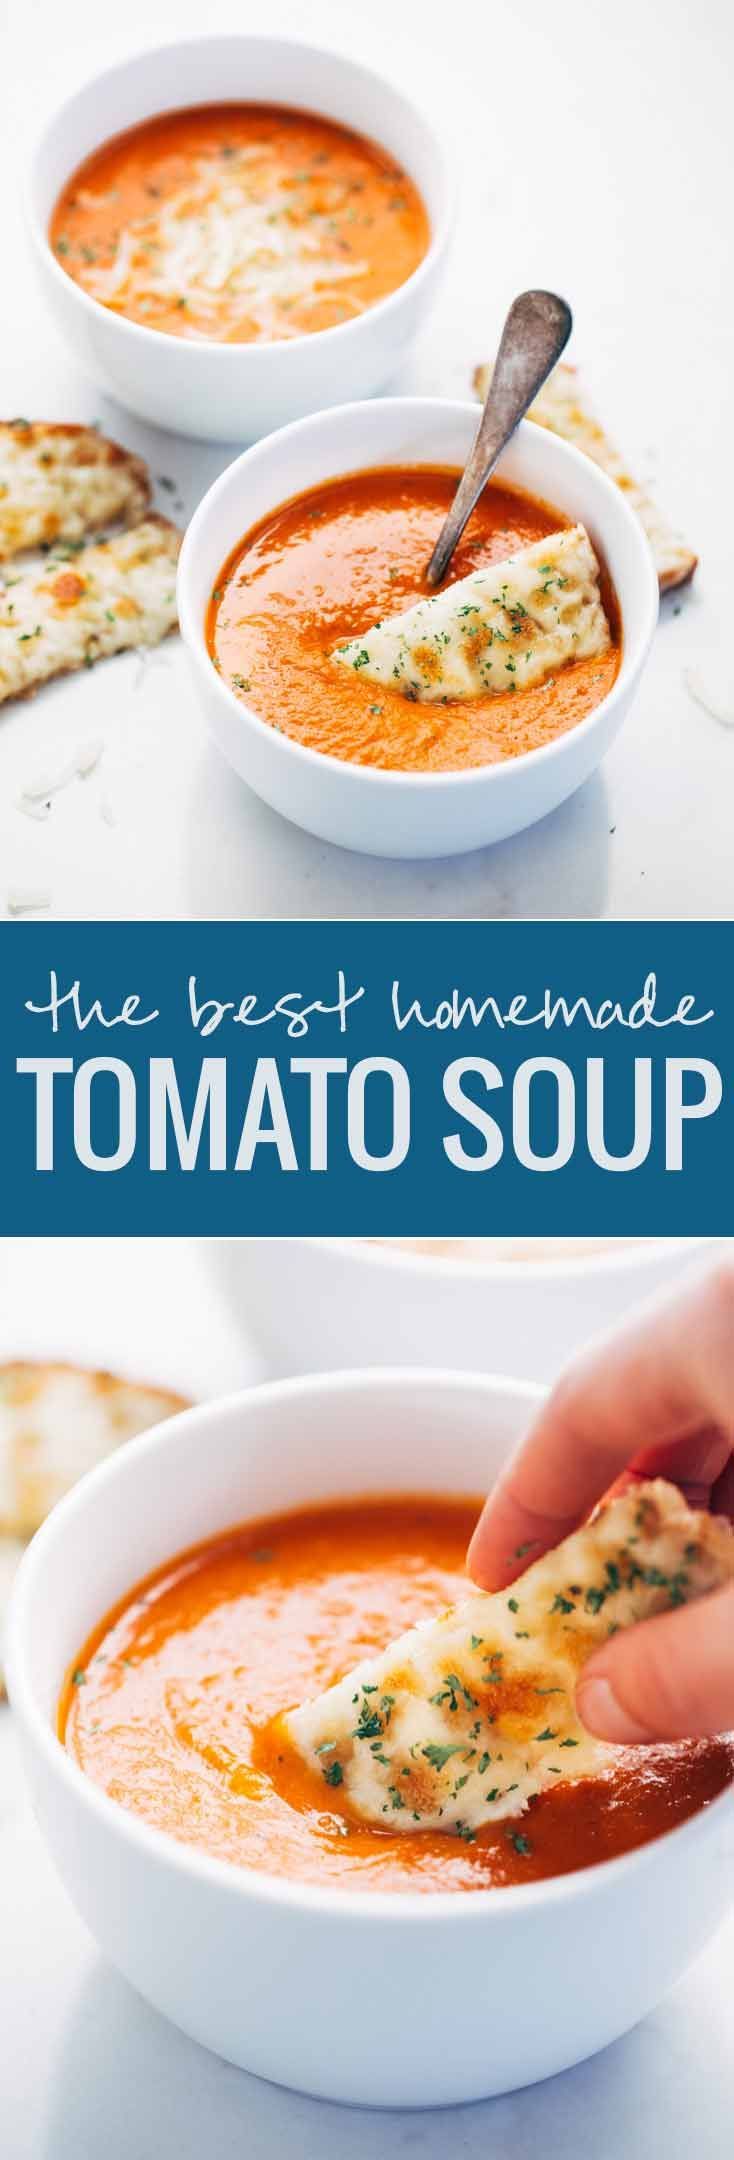 Simple Homemade Tomato Soup – just a handful of pantry ingredients and 20 minutes hands-on time is all it takes to make this